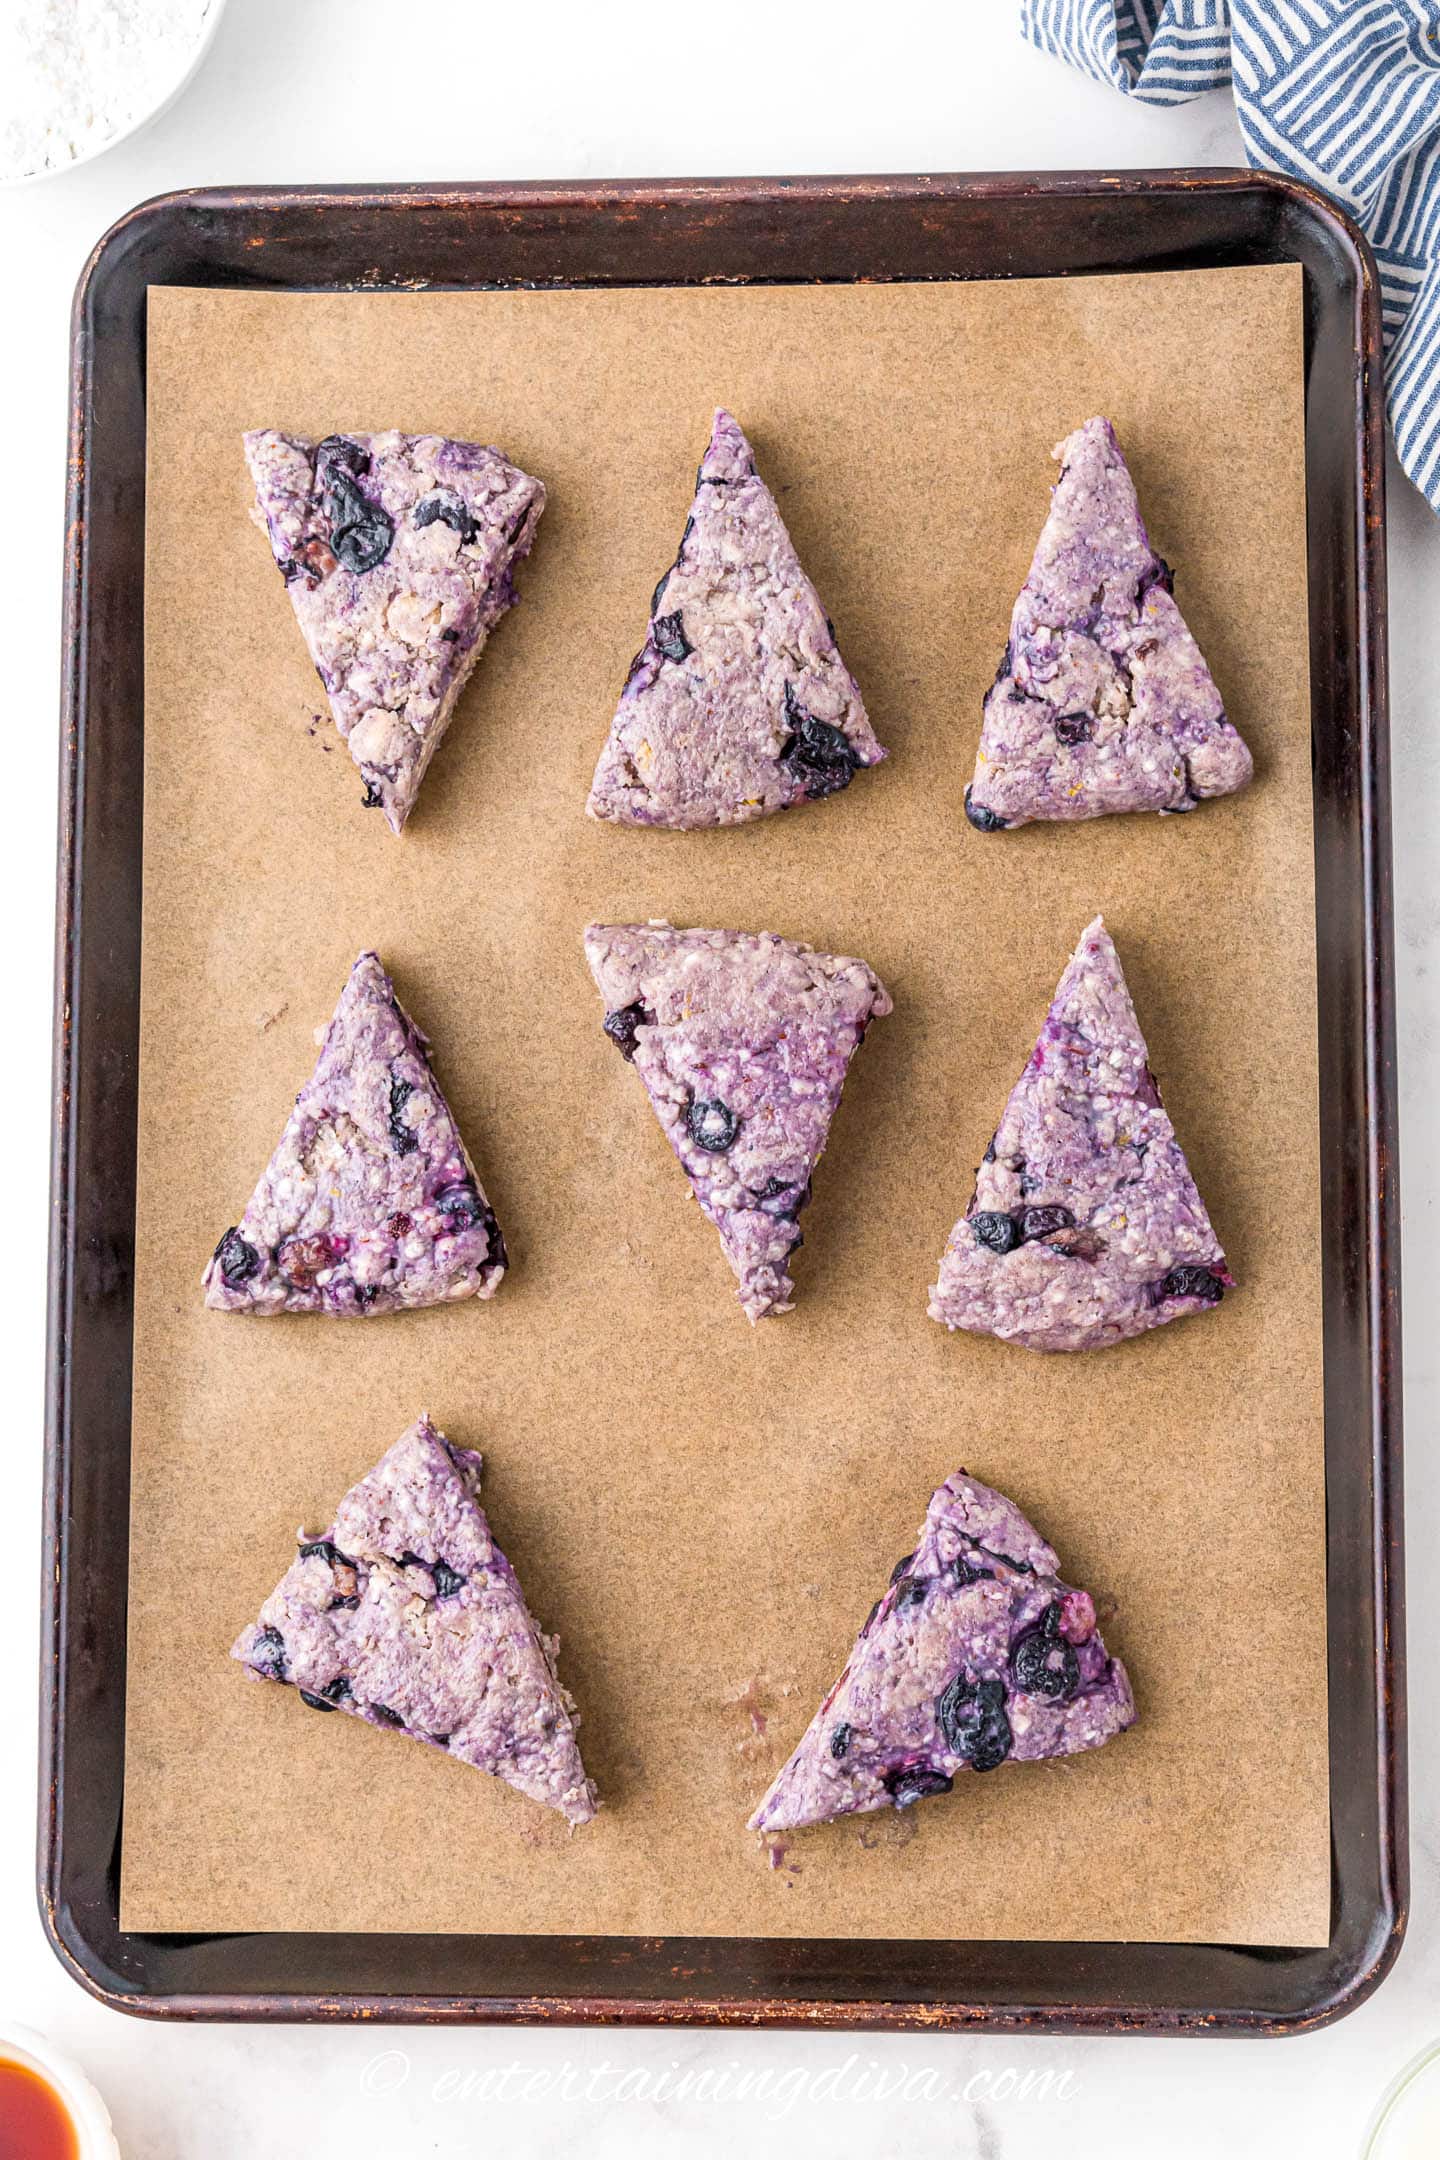 lemon blueberry scones on a parchment-lined baking sheet before baking